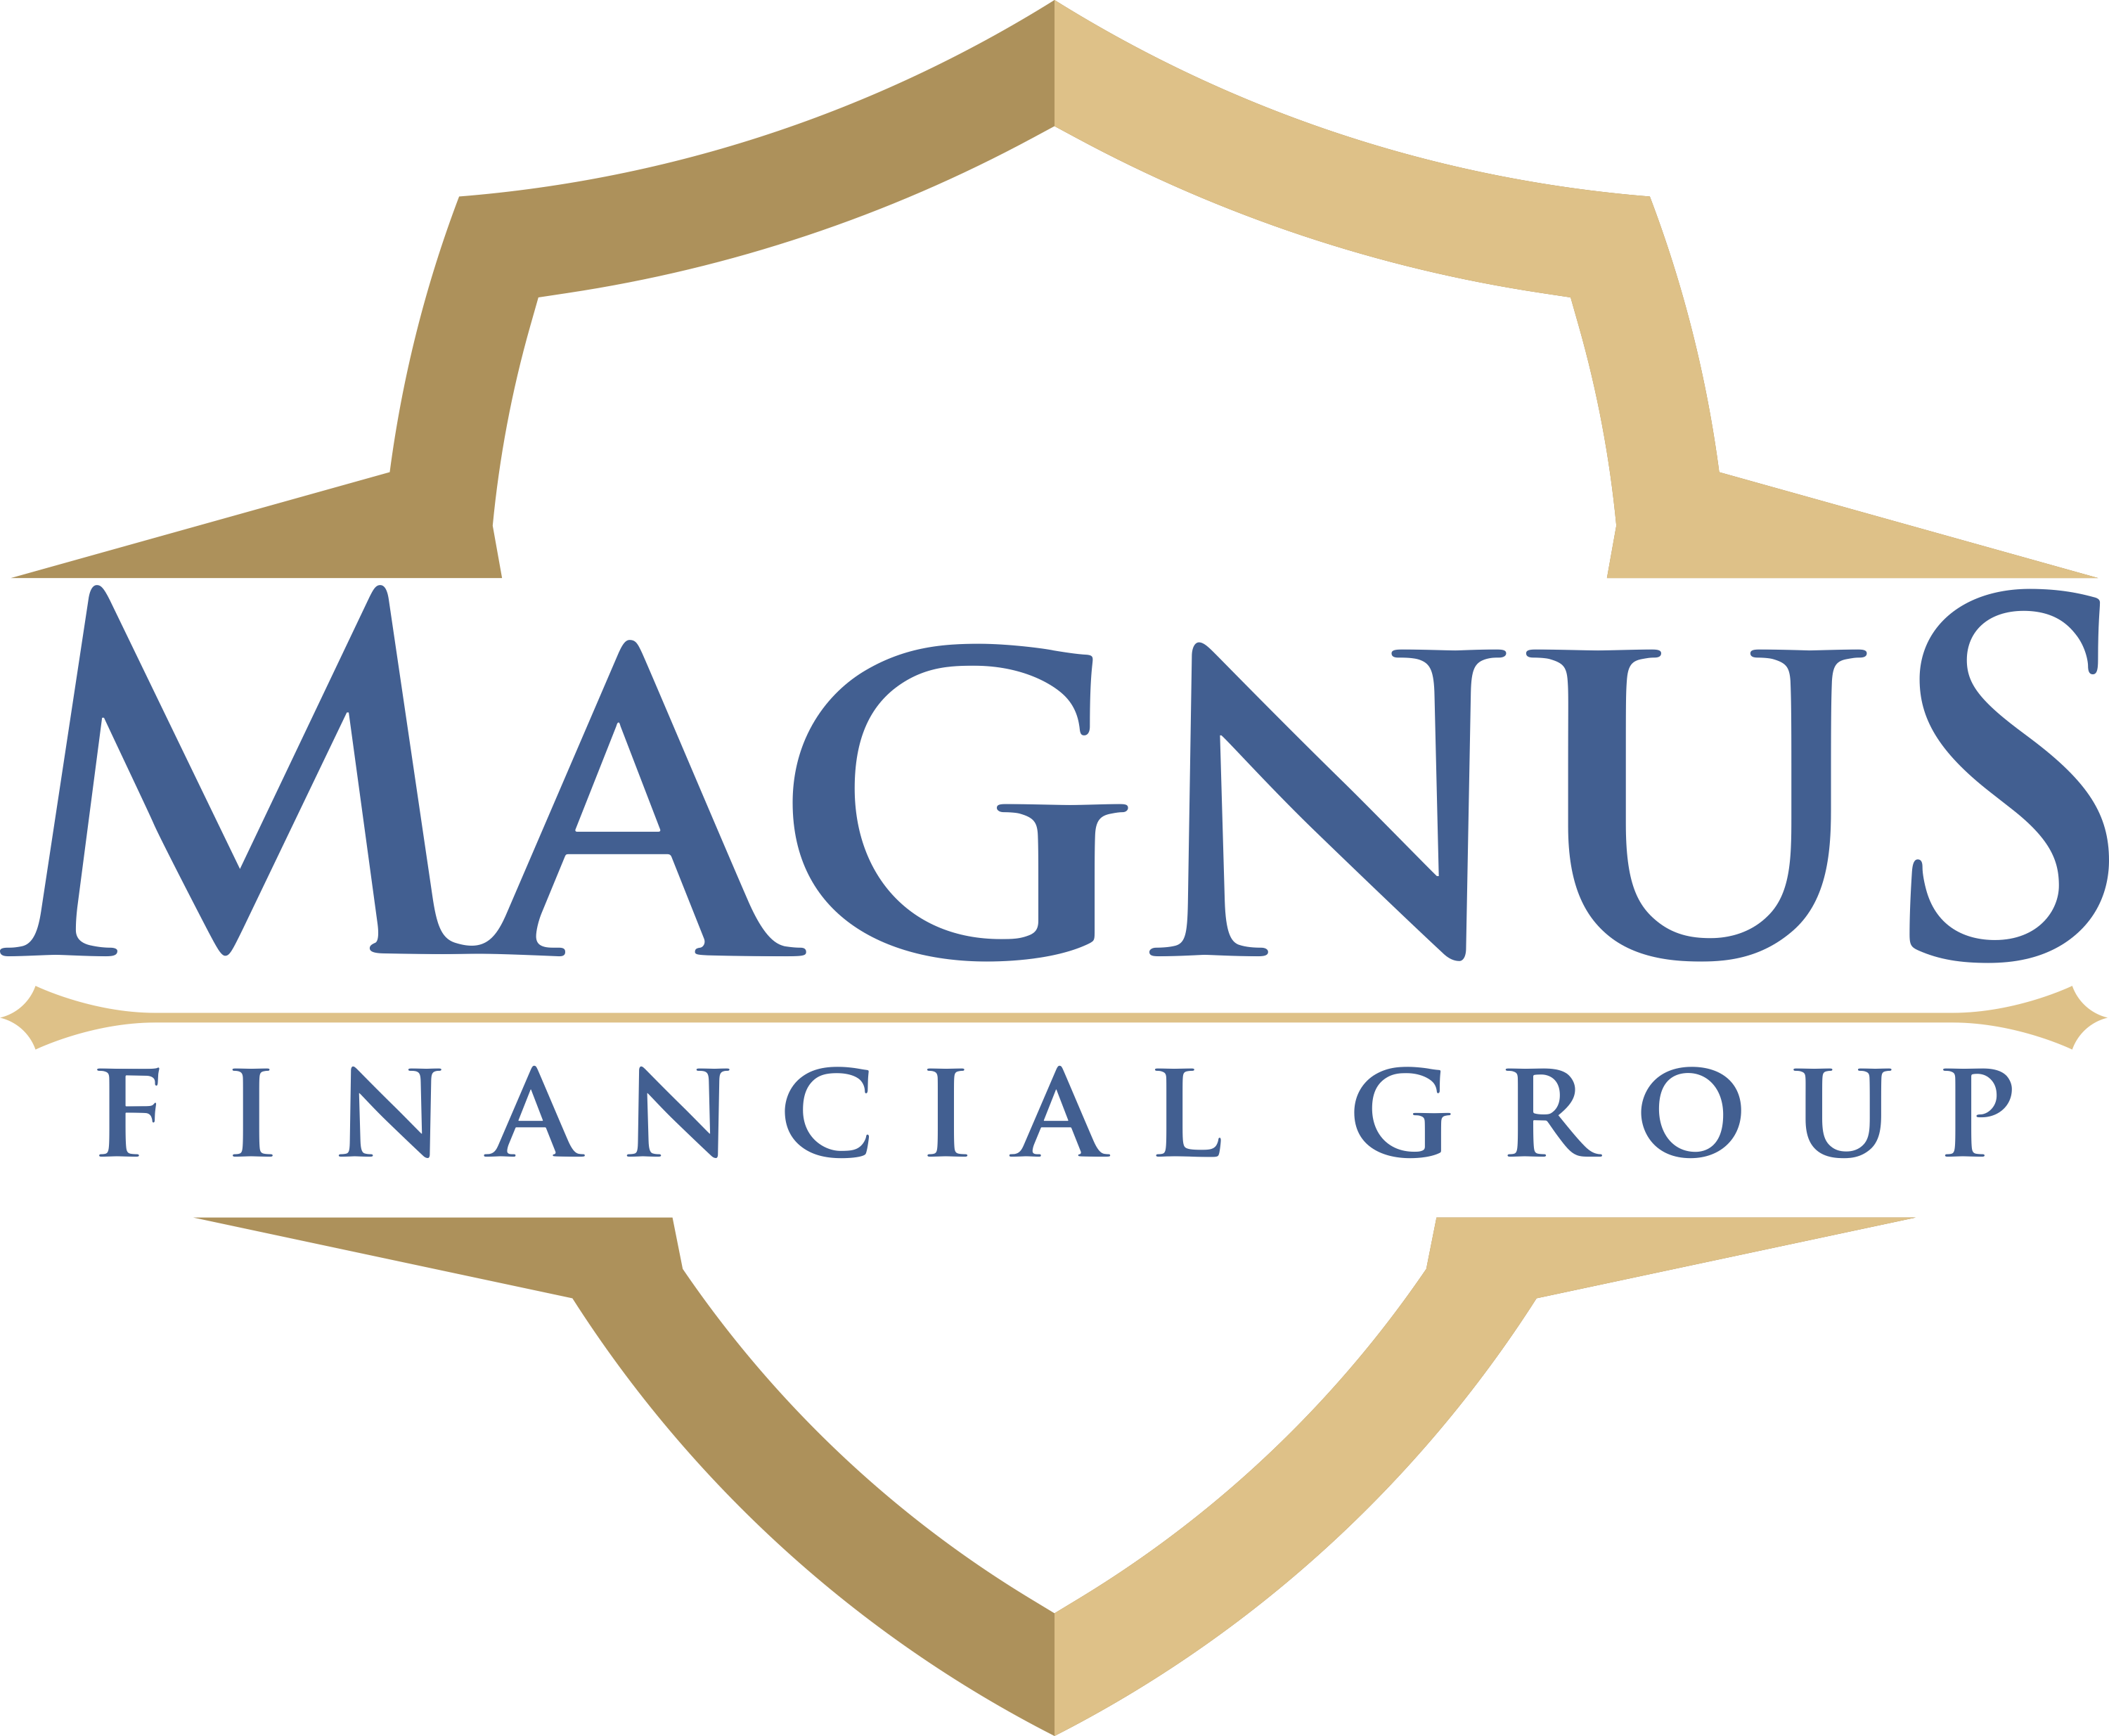 Featured Image for Magnus Financial Group LLC